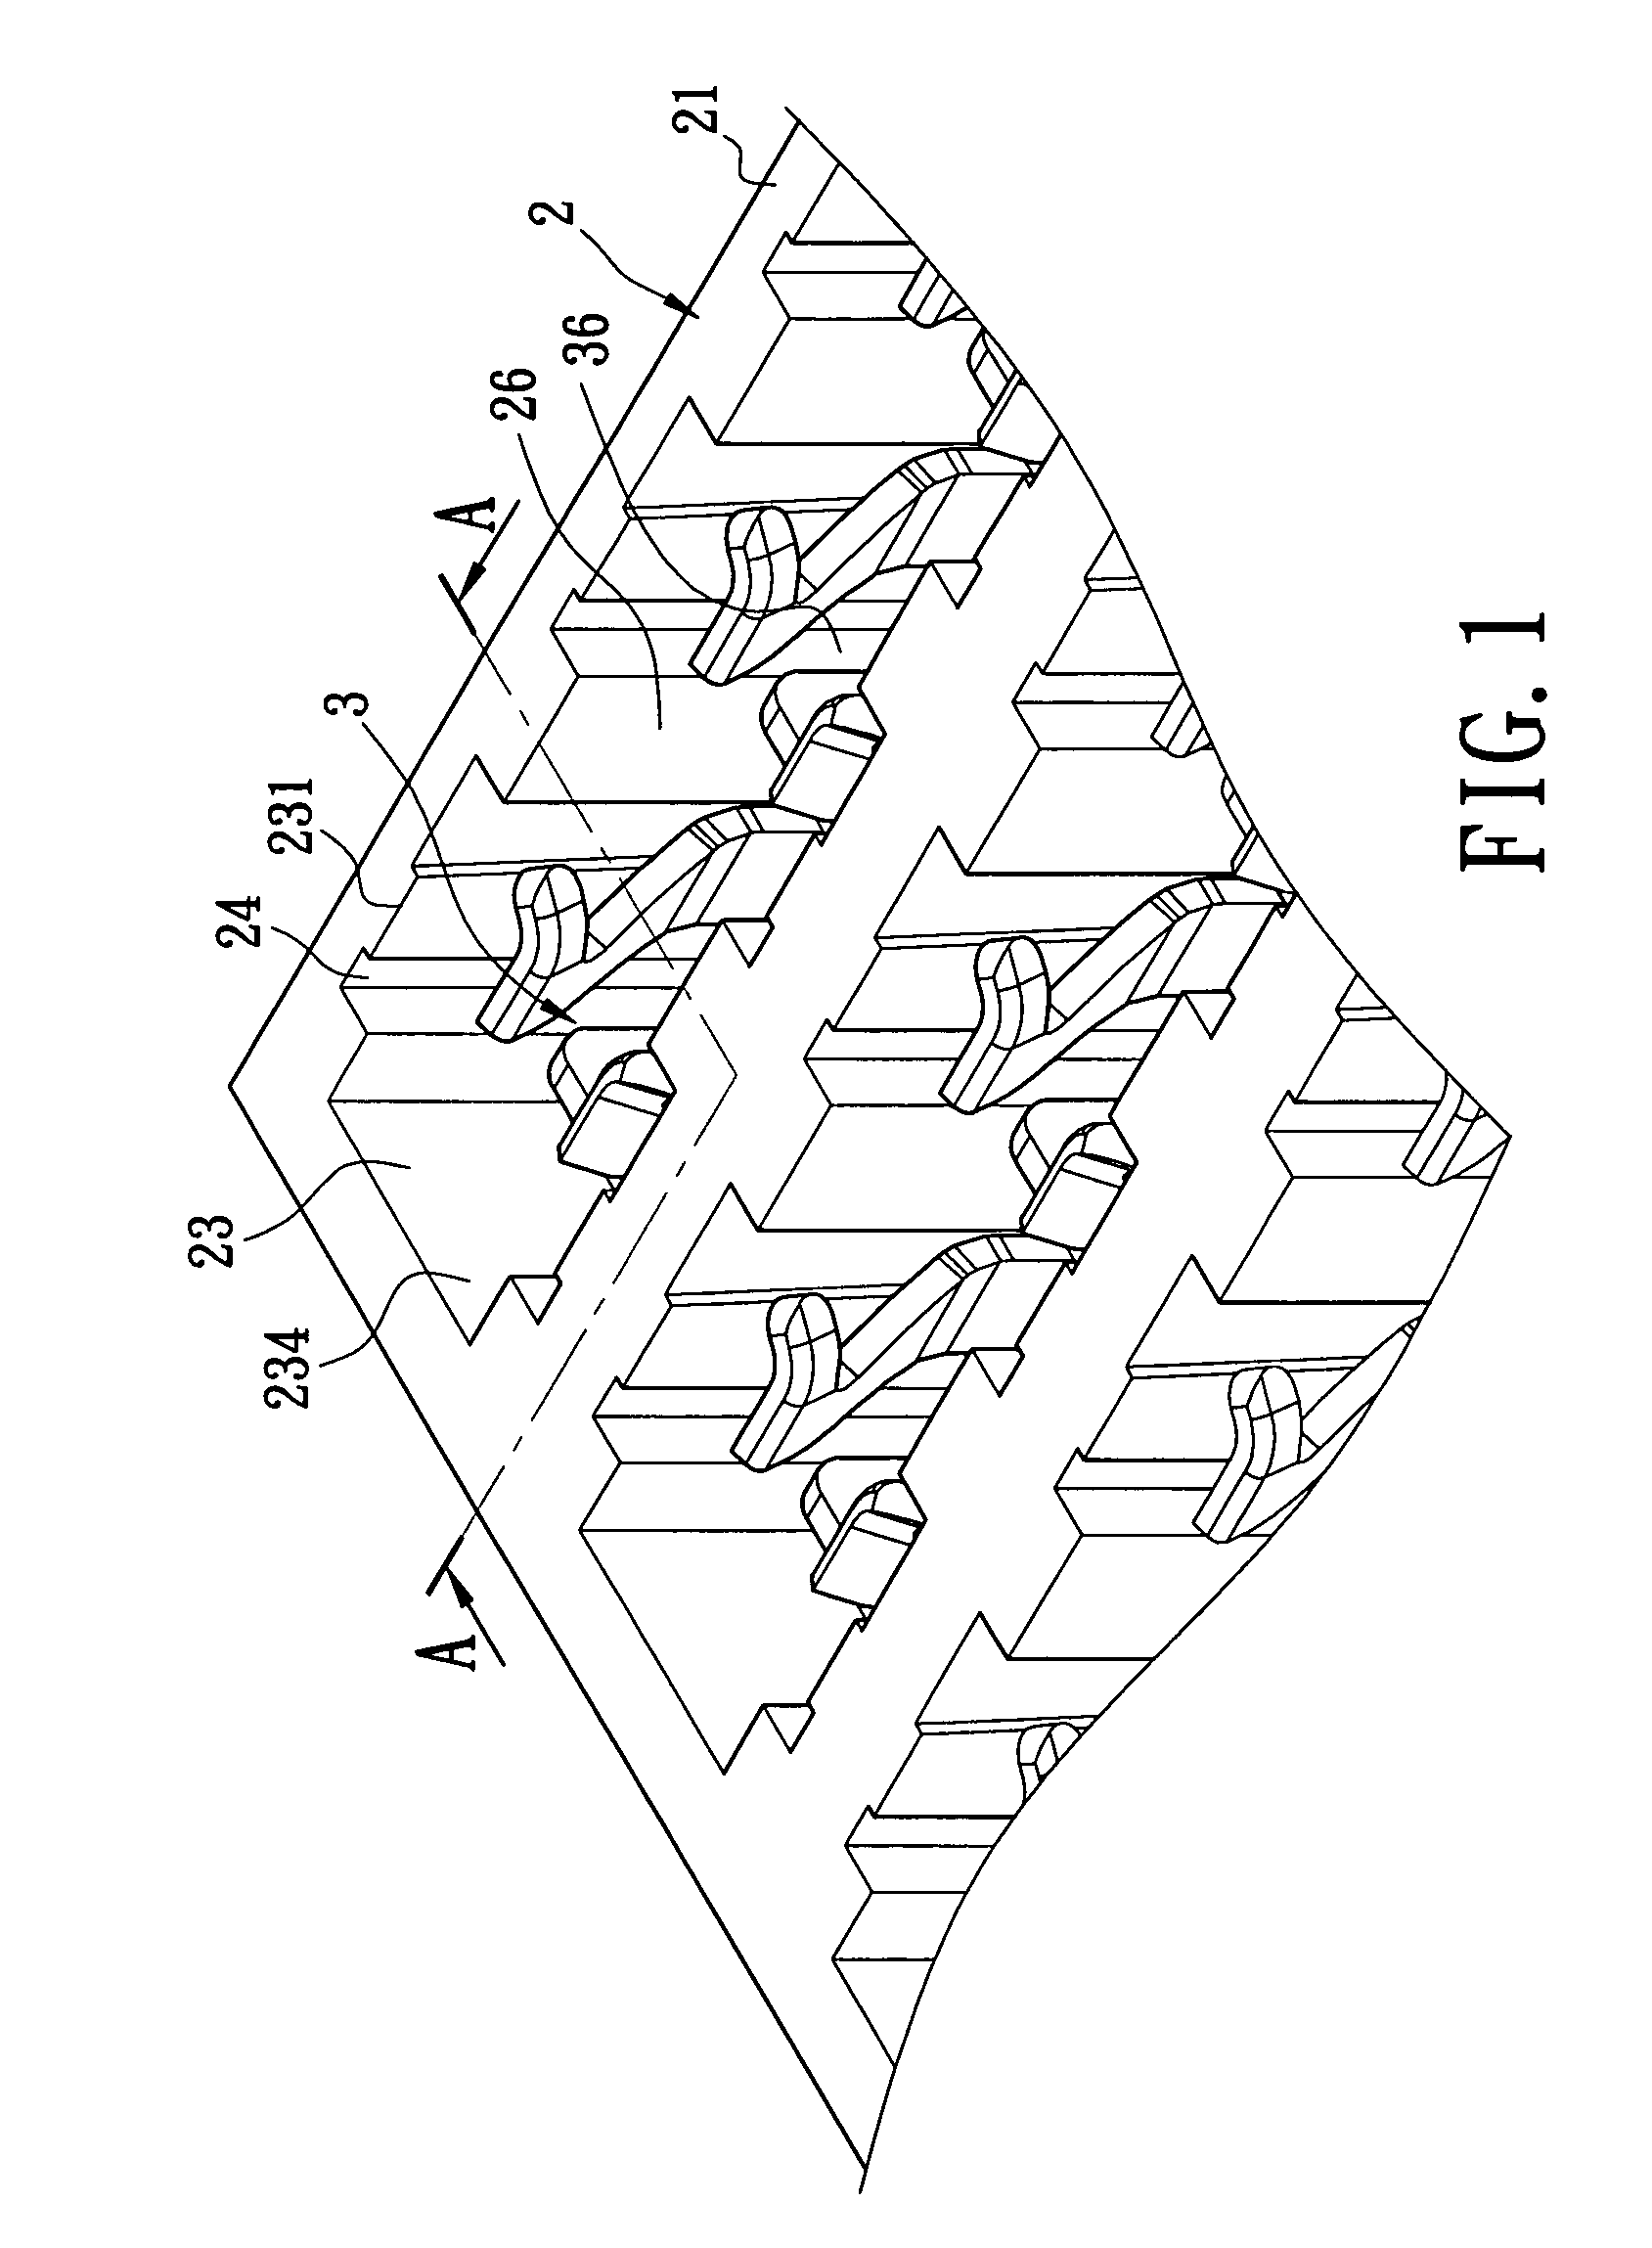 Electrical connector terminal having two contact portions and two leaning portions extending from a base